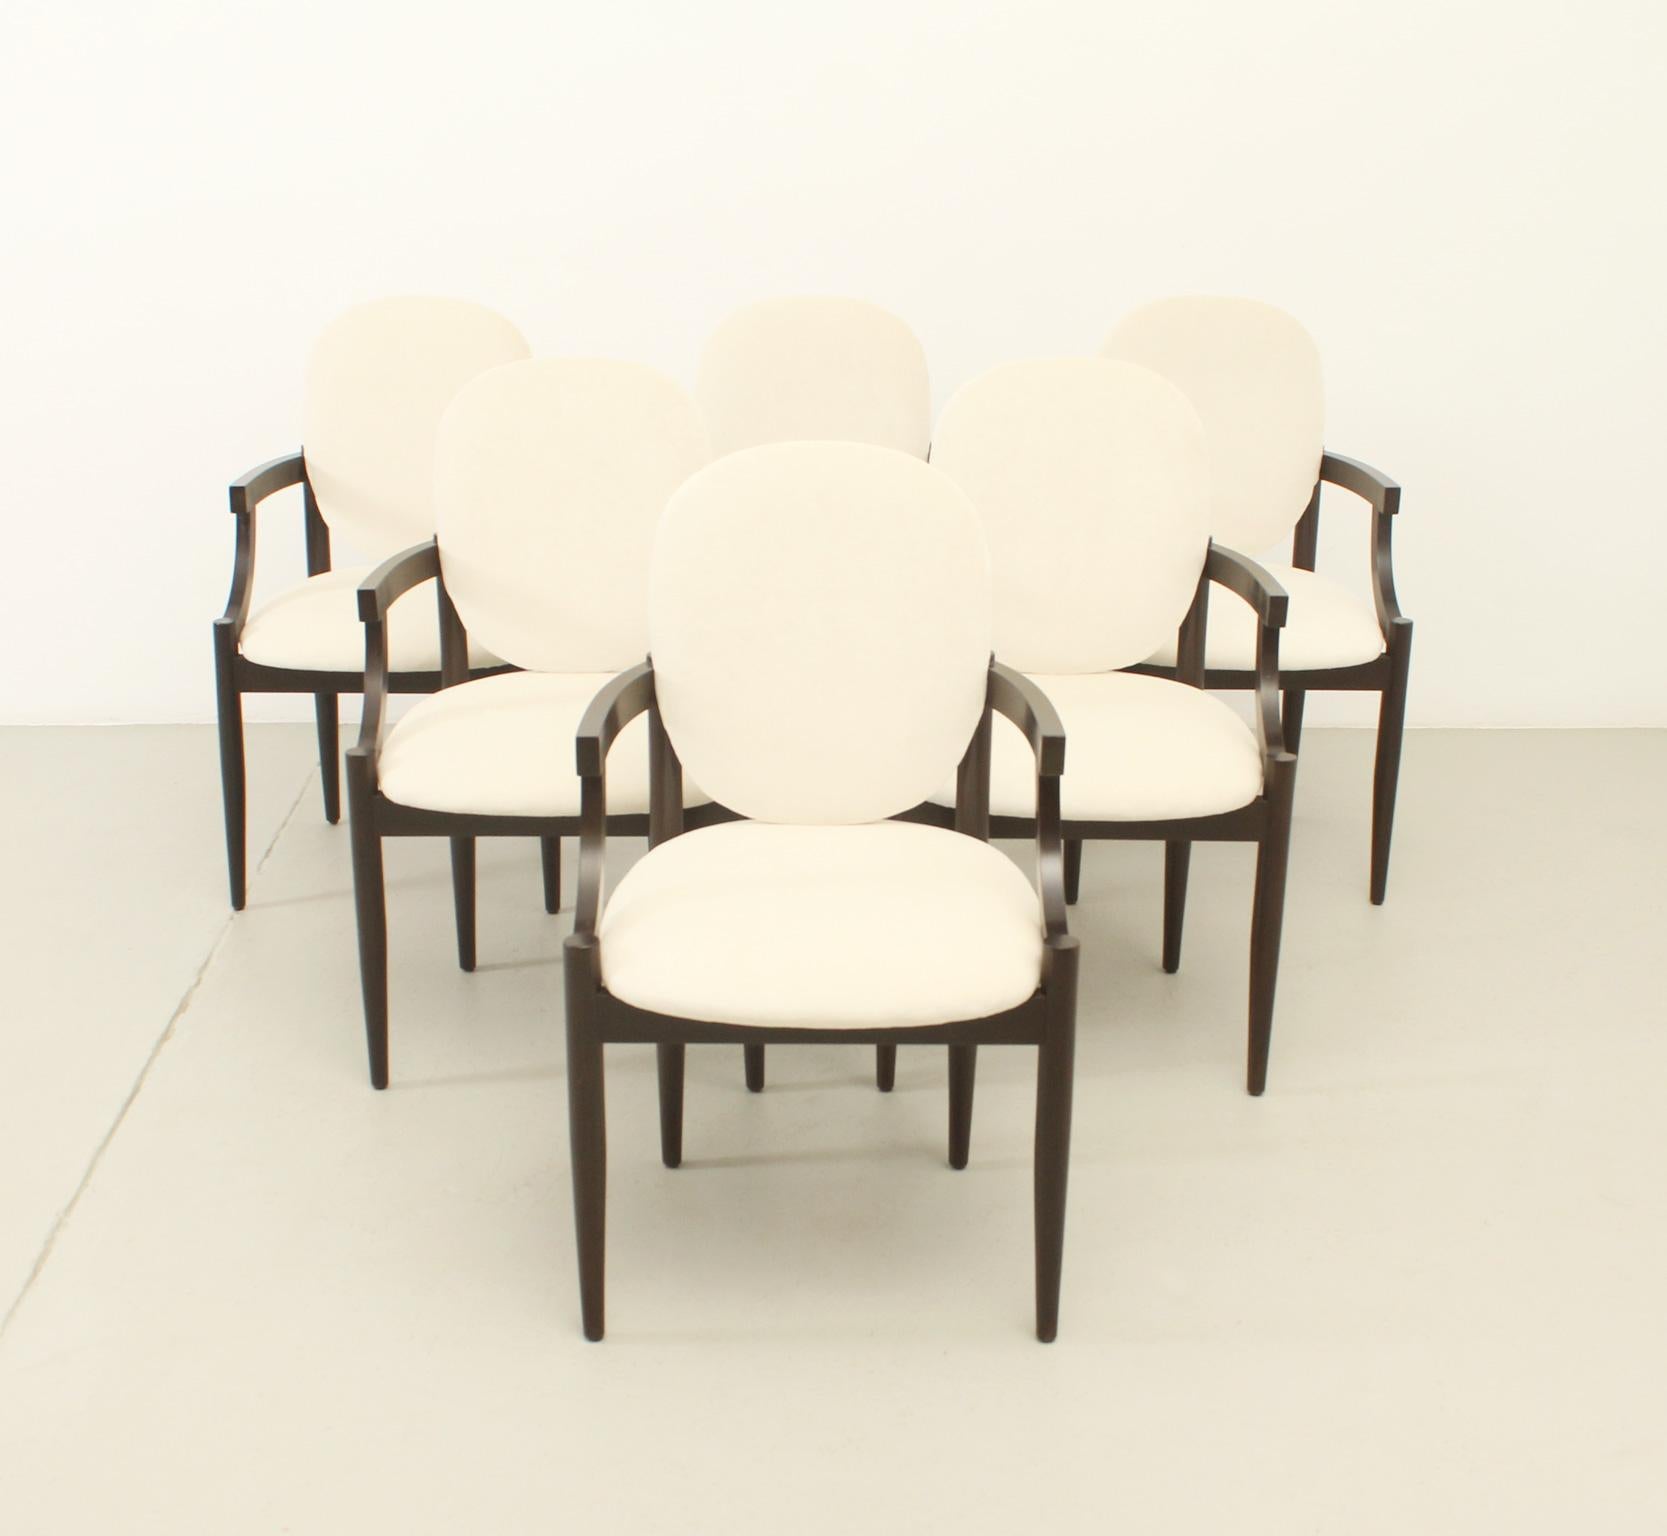 Set of six Reno chairs designed in 1961 by Spanish architects Federico Correa and Alfonso Milá for the Reno restaurant in Barcelona and produced by Gres. Ukola wood structure with brass details and new upholstery with off white velvet fabric.